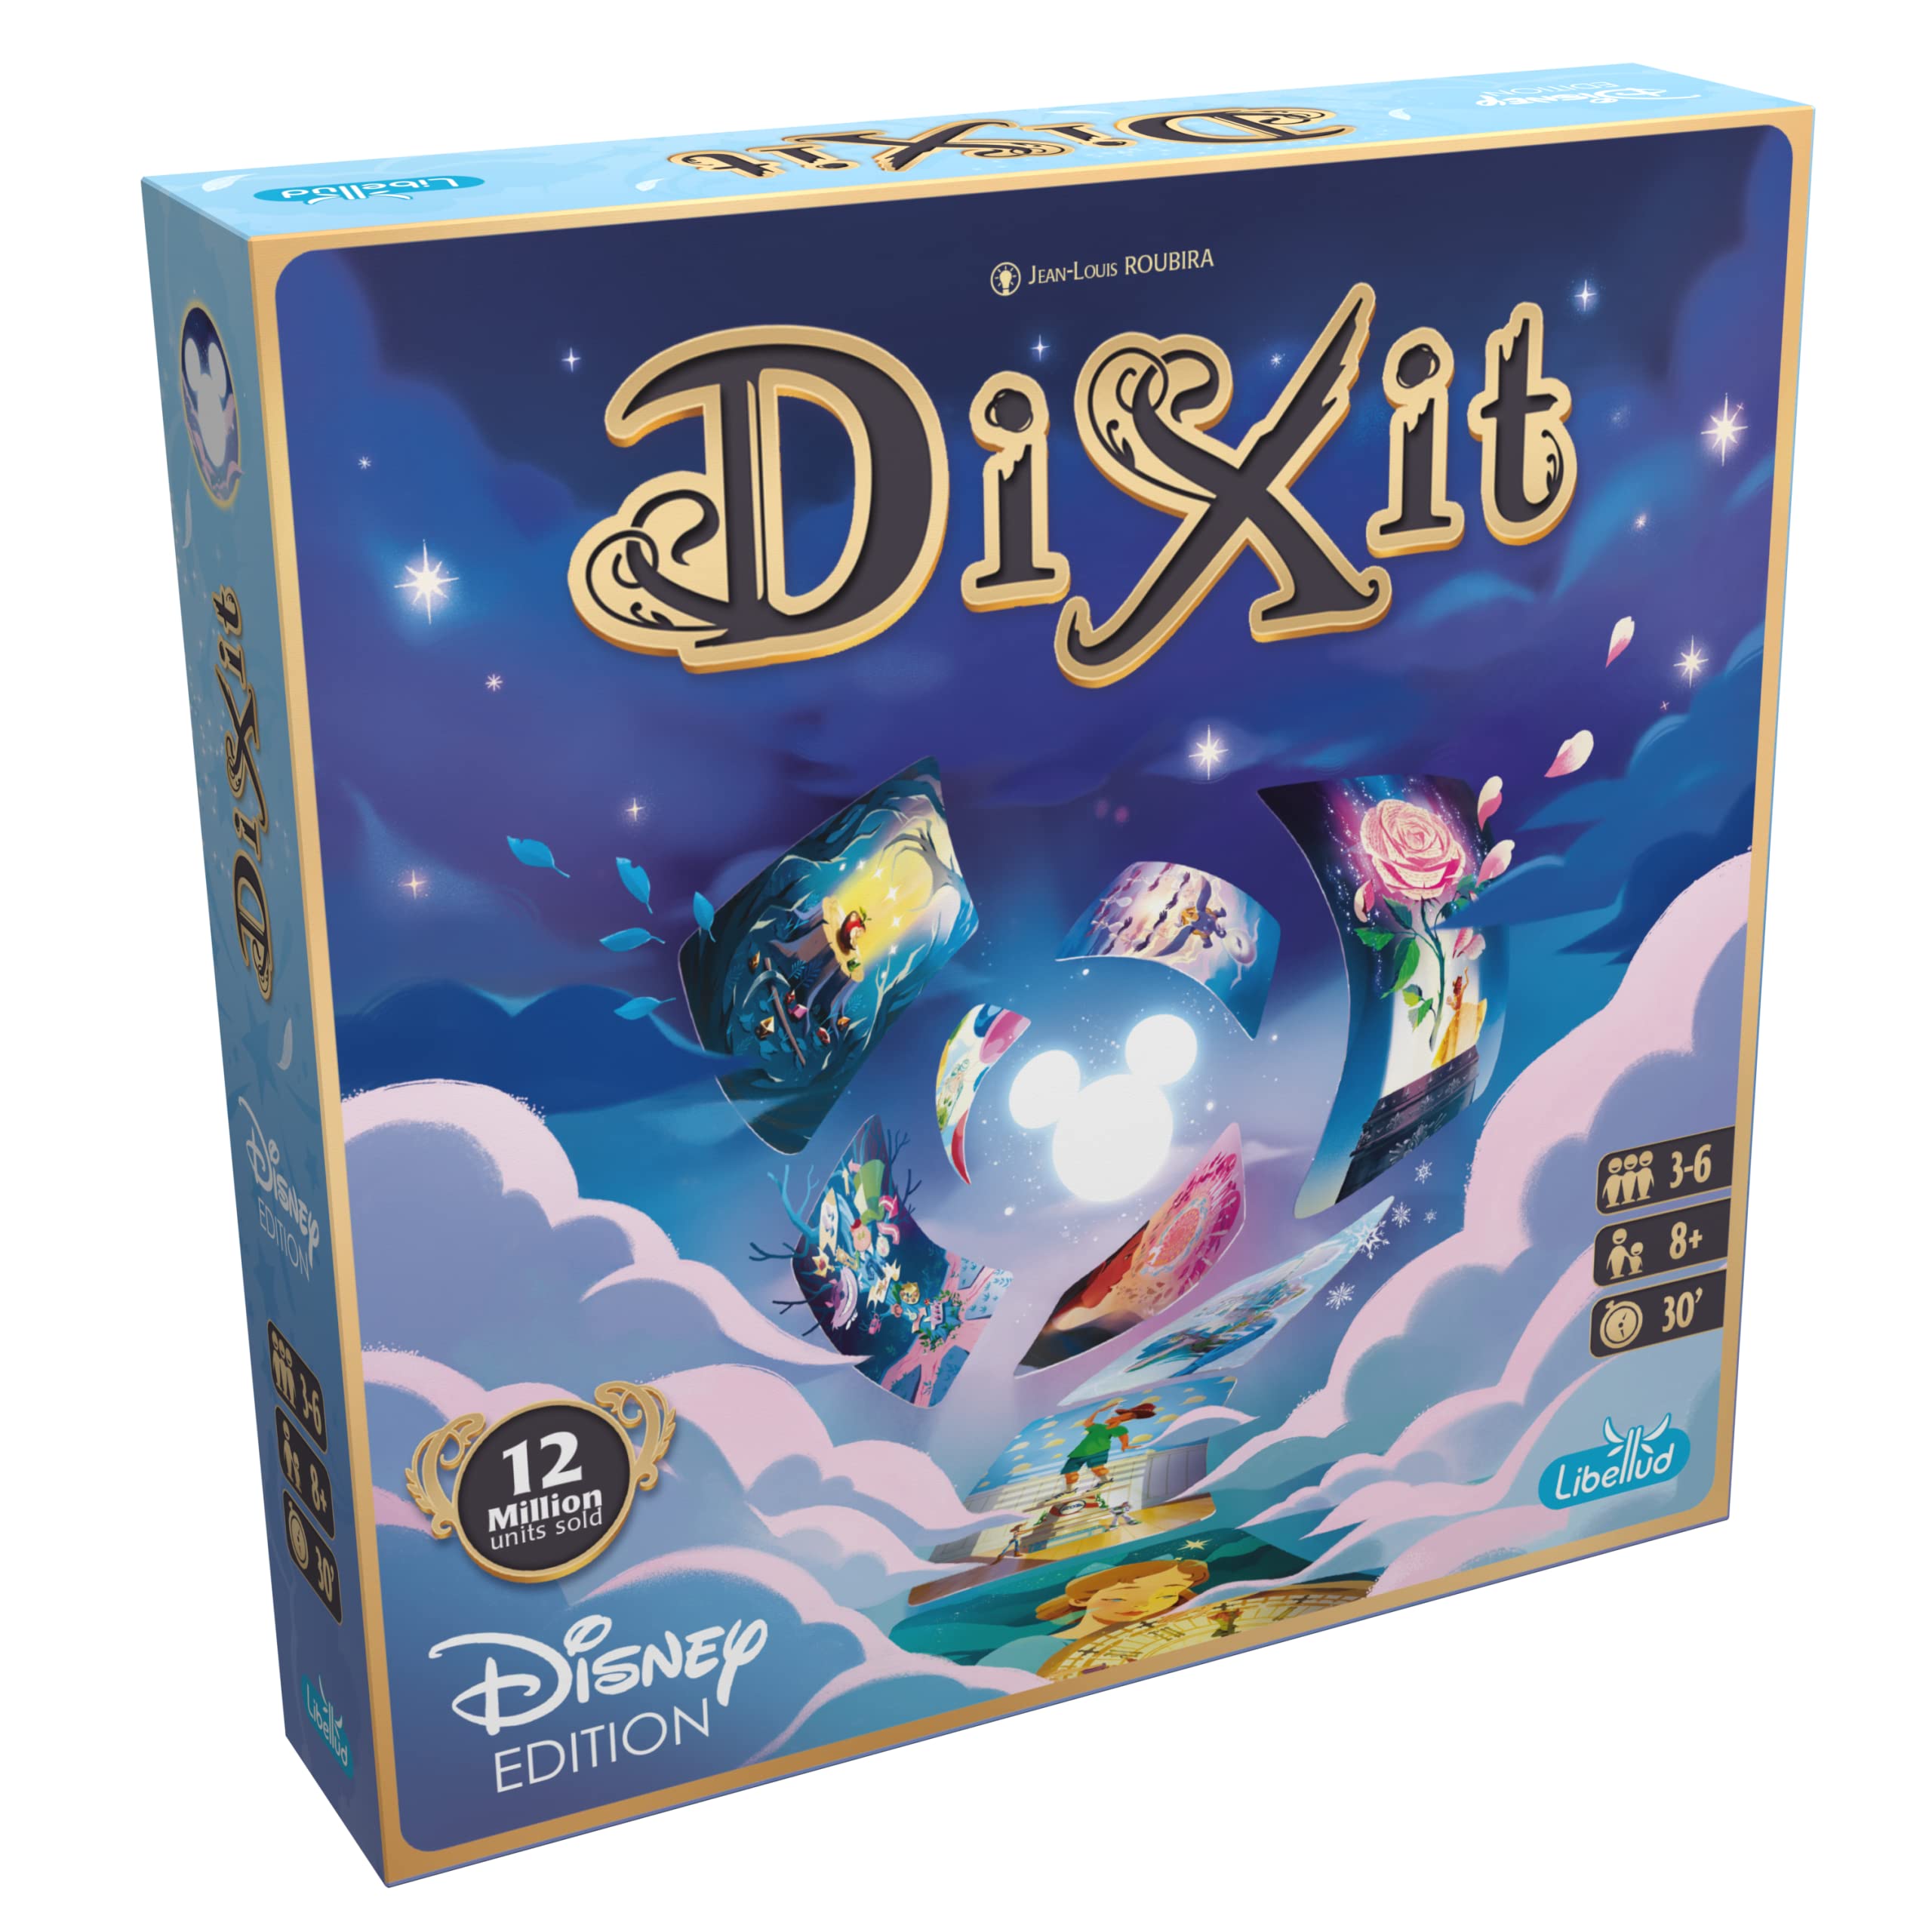 Dixit Disney Edition Board Game - Storytelling Game for Kids and Adults, Fun Game for Family Game Night, Creative Kids Game, Ages 8+, 3-6 Players, 30 Minute Playtime, Made by Libellud